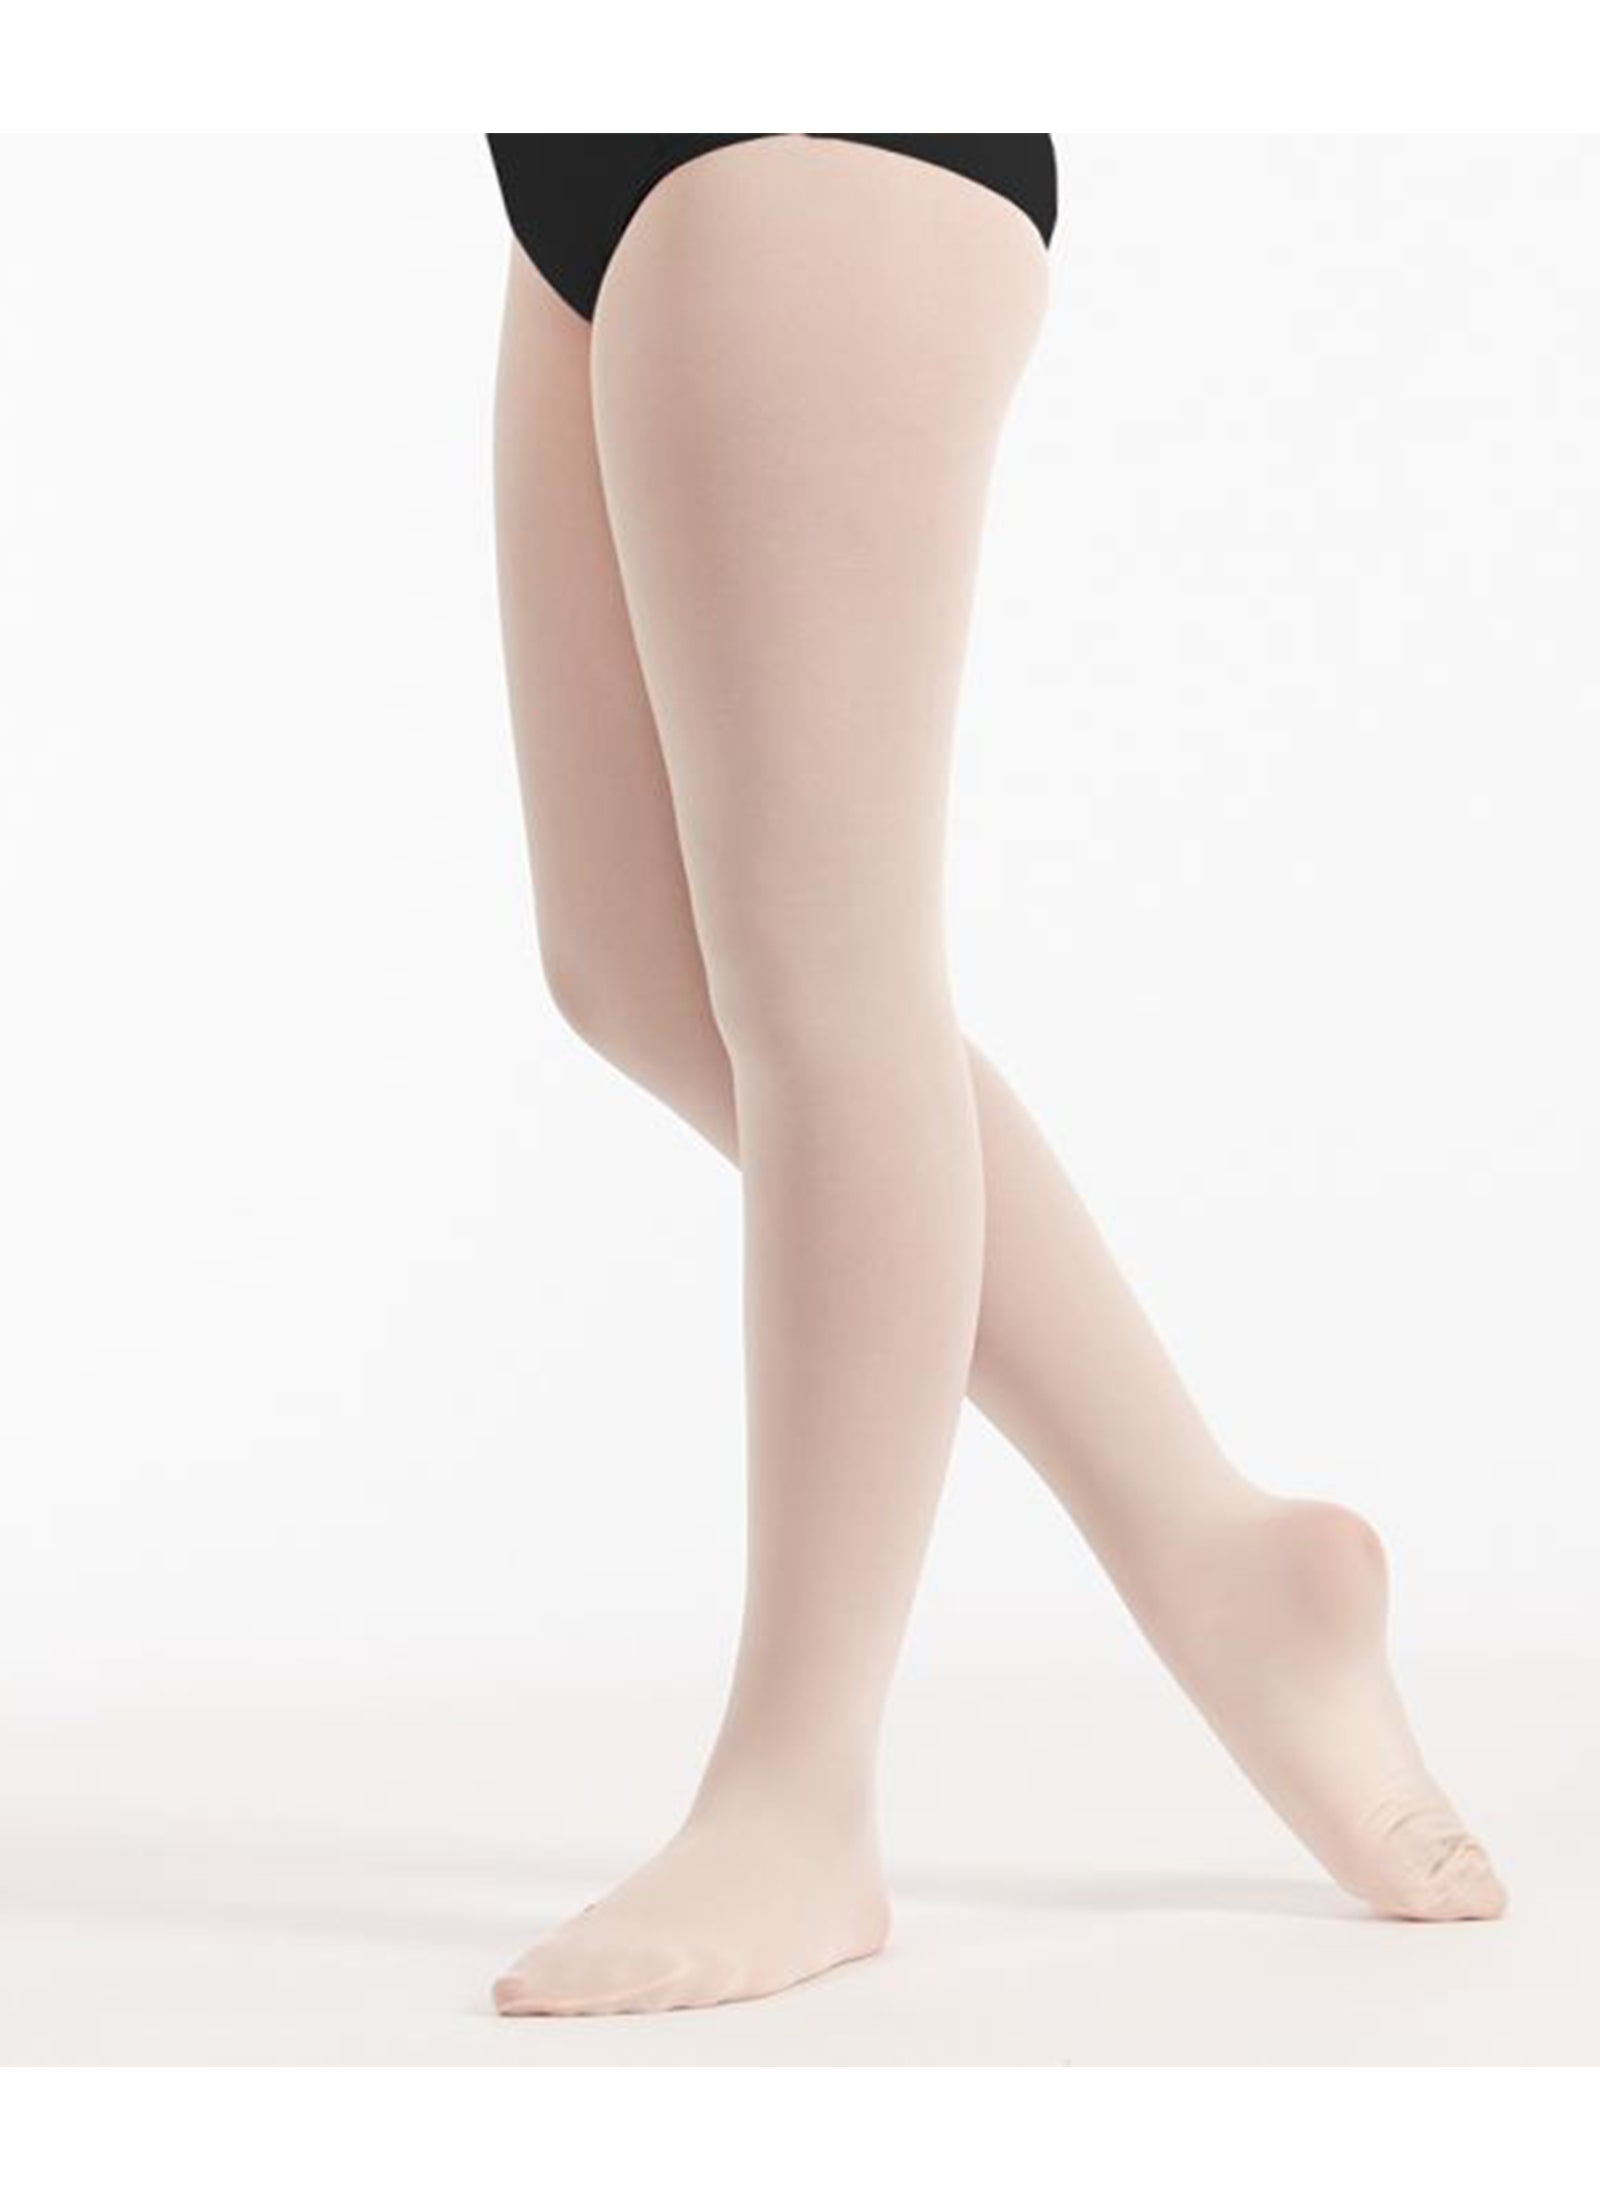 TS69 Children's Footless Tights